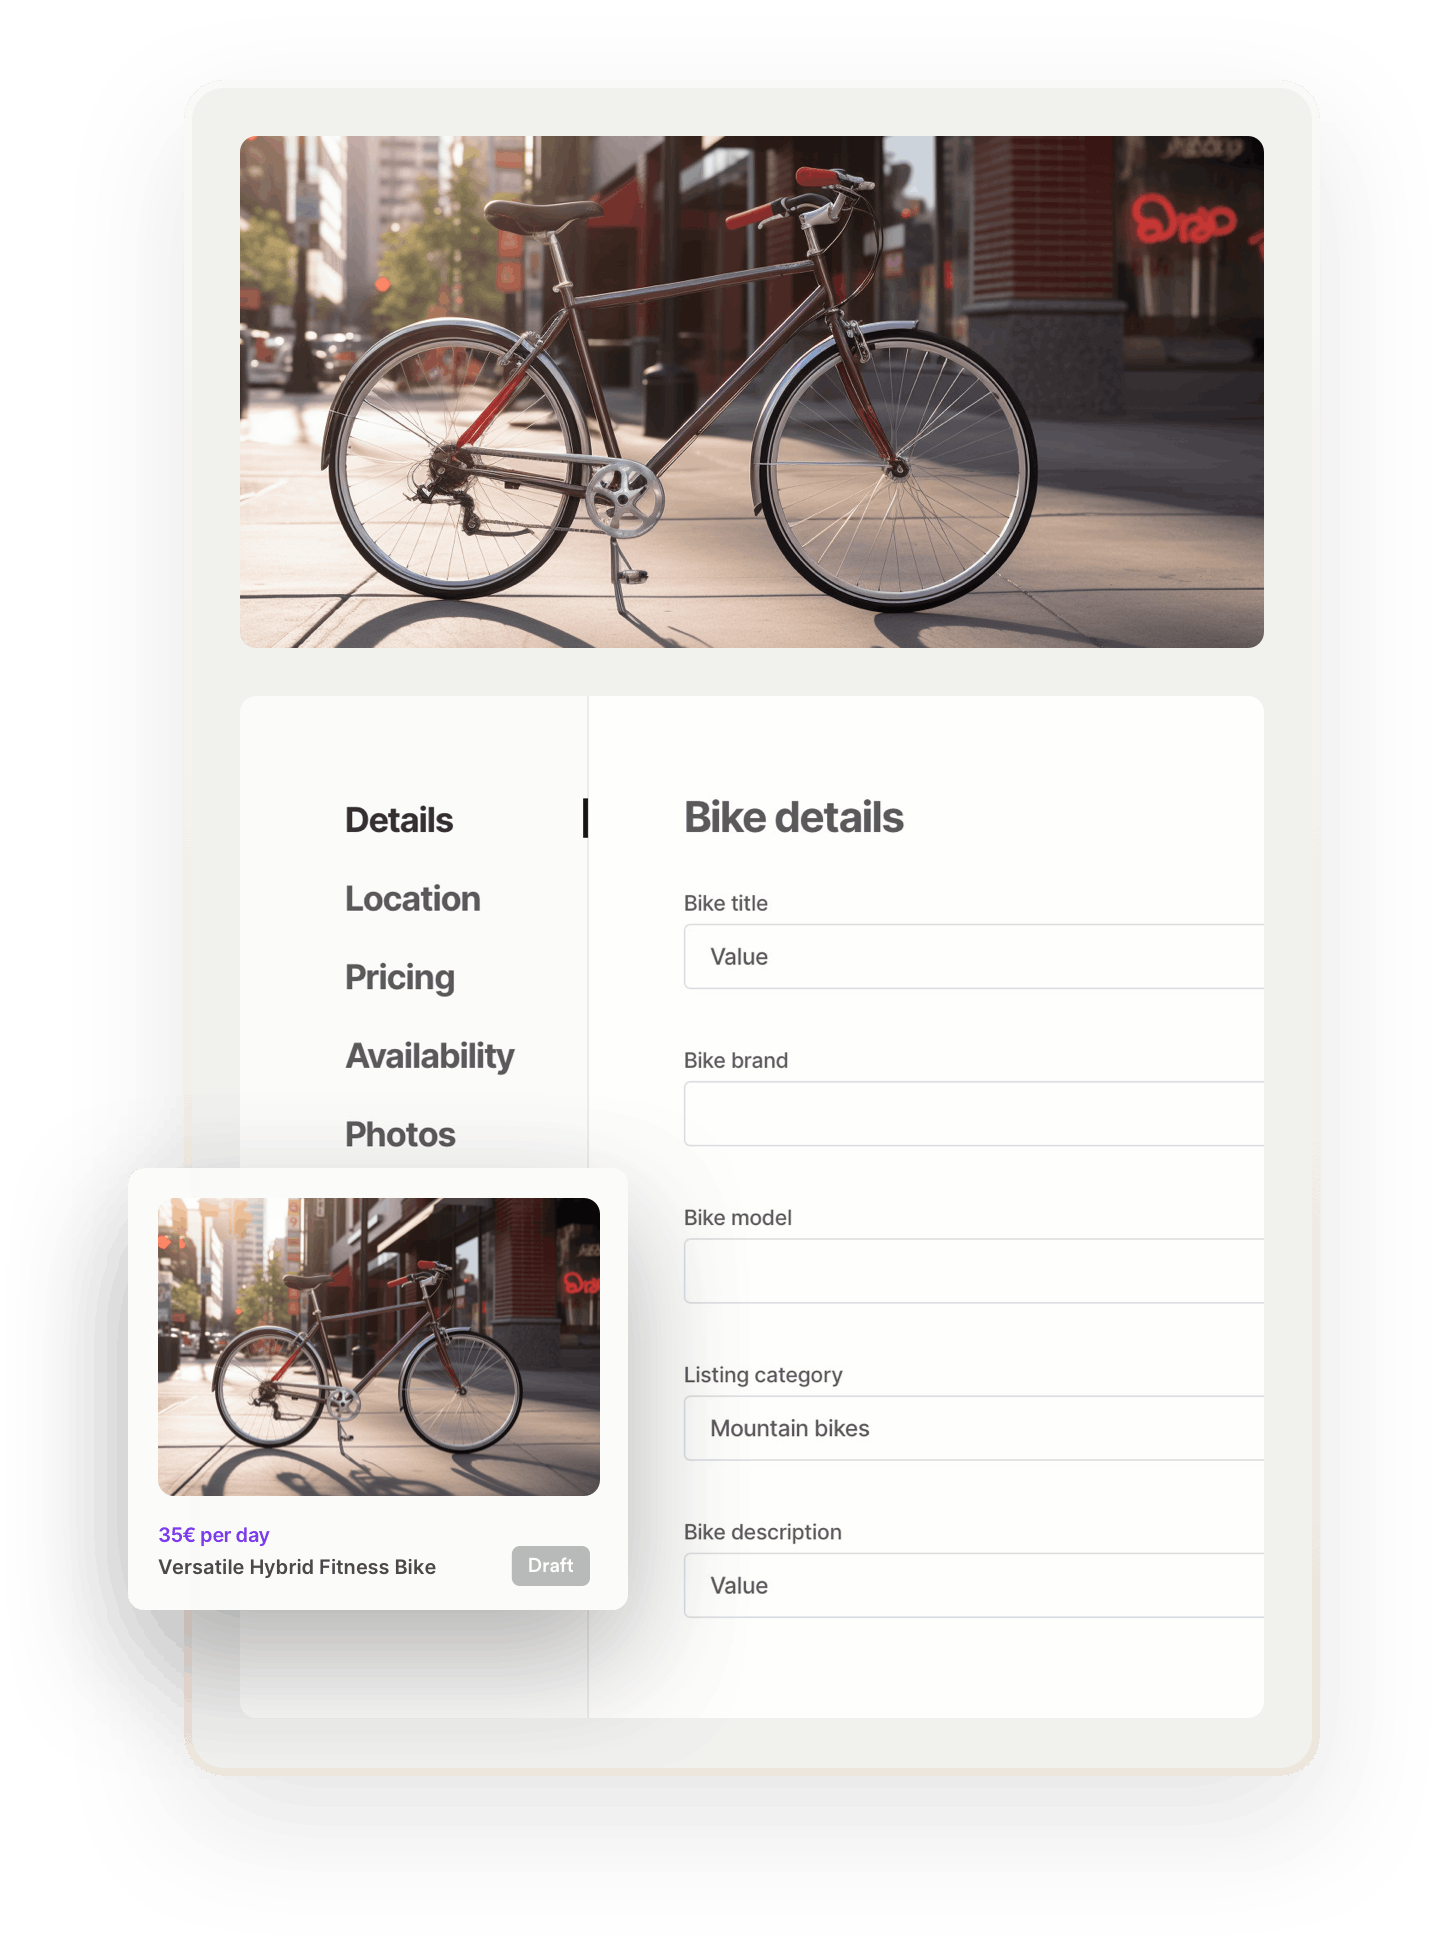 On the top, there's an image of a city bike, basking in evening sunlight. Below, the listing creation page is opened on the Details tab. The page asks for a bike title, brand, model, and so on. Further tabs include location, pricing, and availability. Overlaid on top is a search thumbnail for the completed listing.